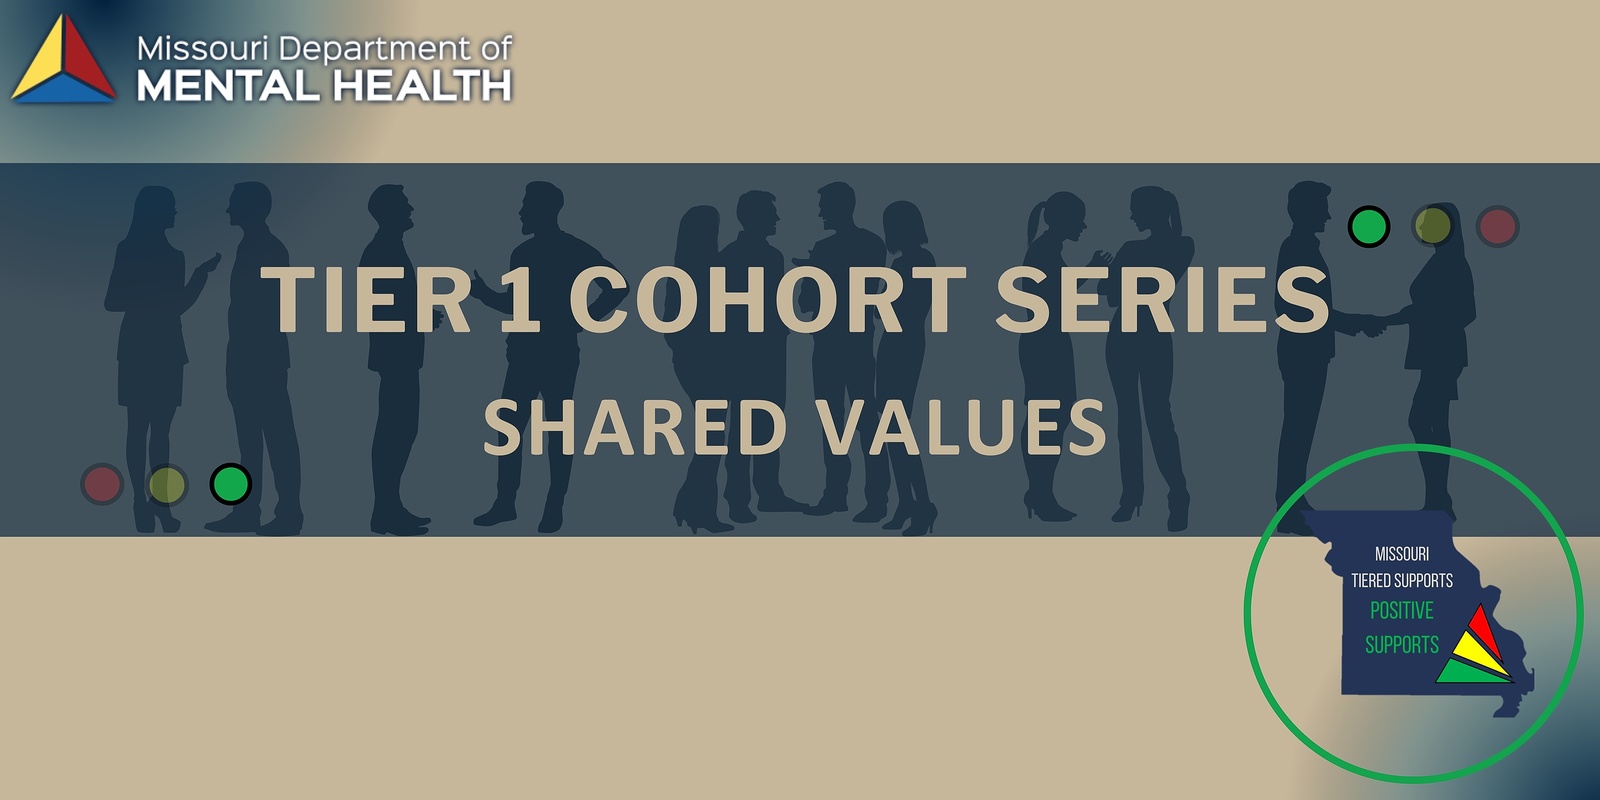 Banner image for Tier 1 Cohort Series - Shared Values System 7/9/24